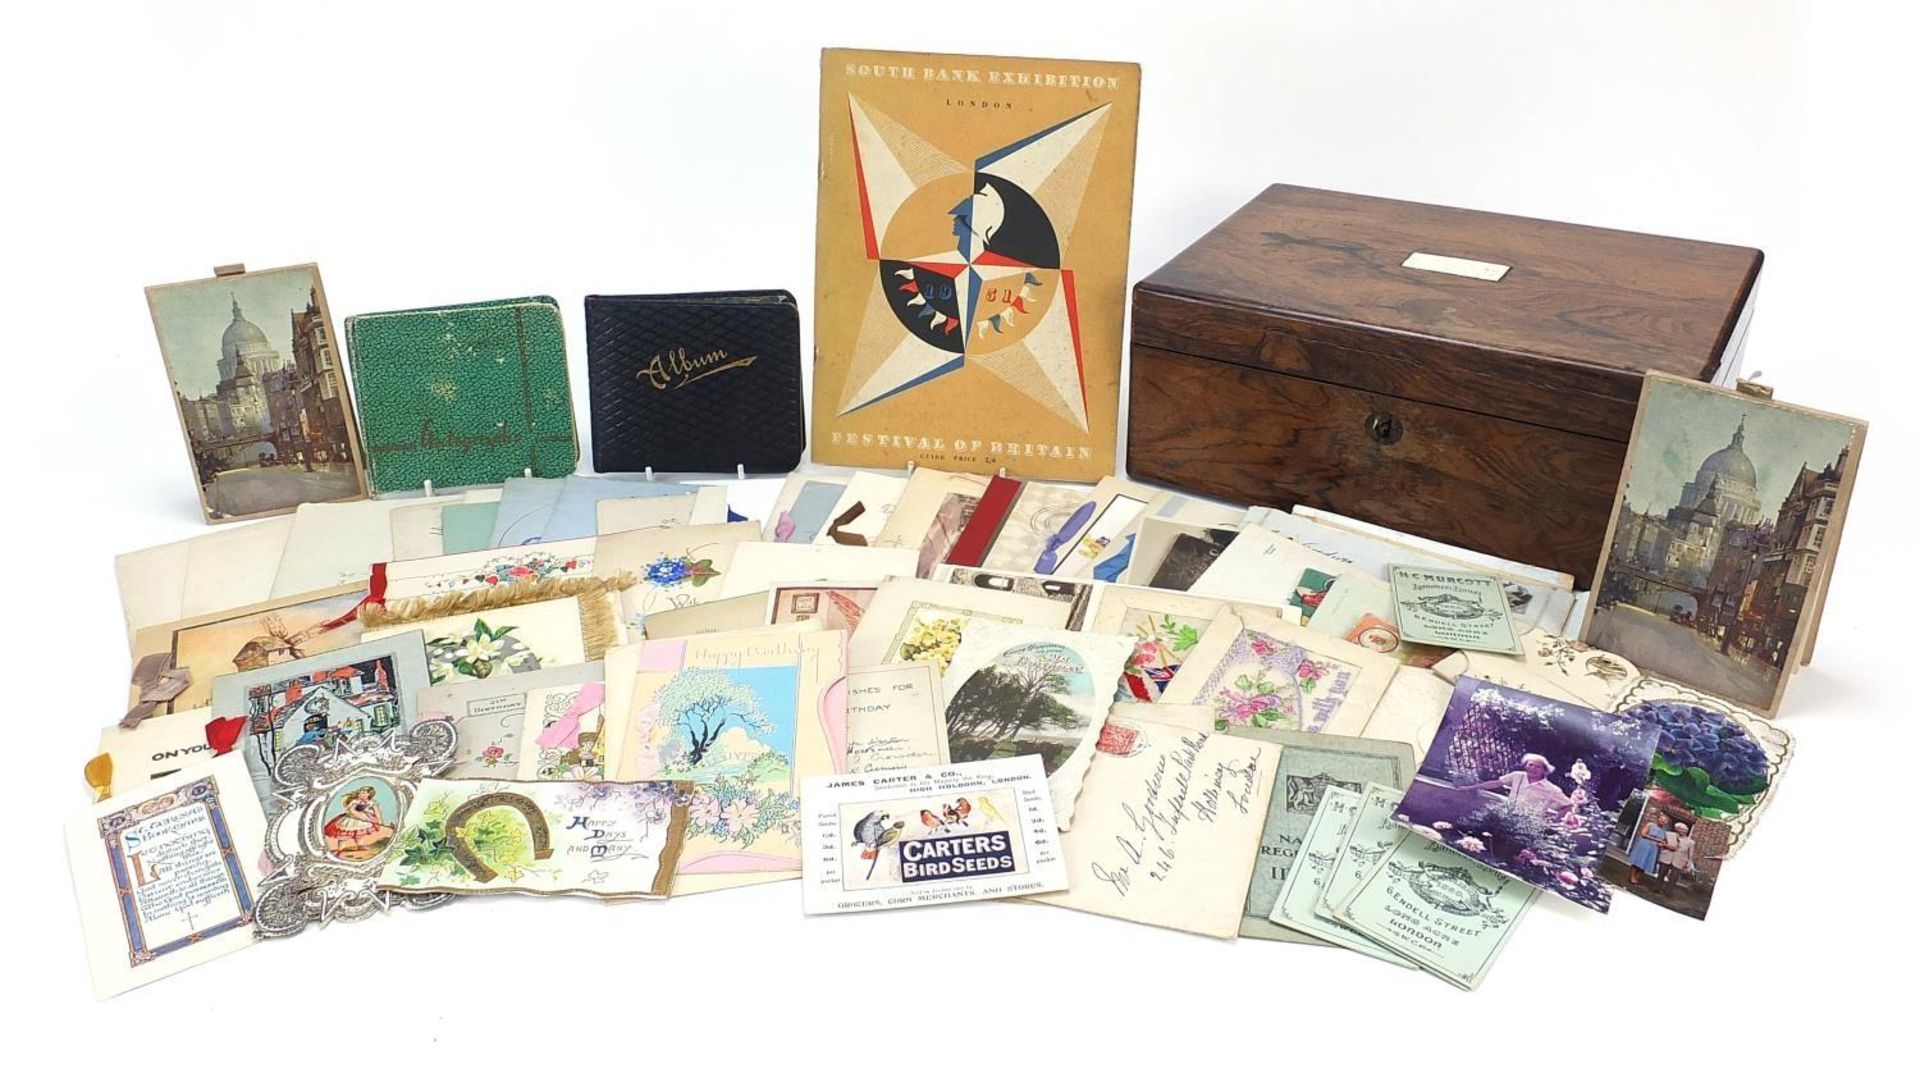 Collection of Victorian and later ephemera housed in a rosewood box including an album with